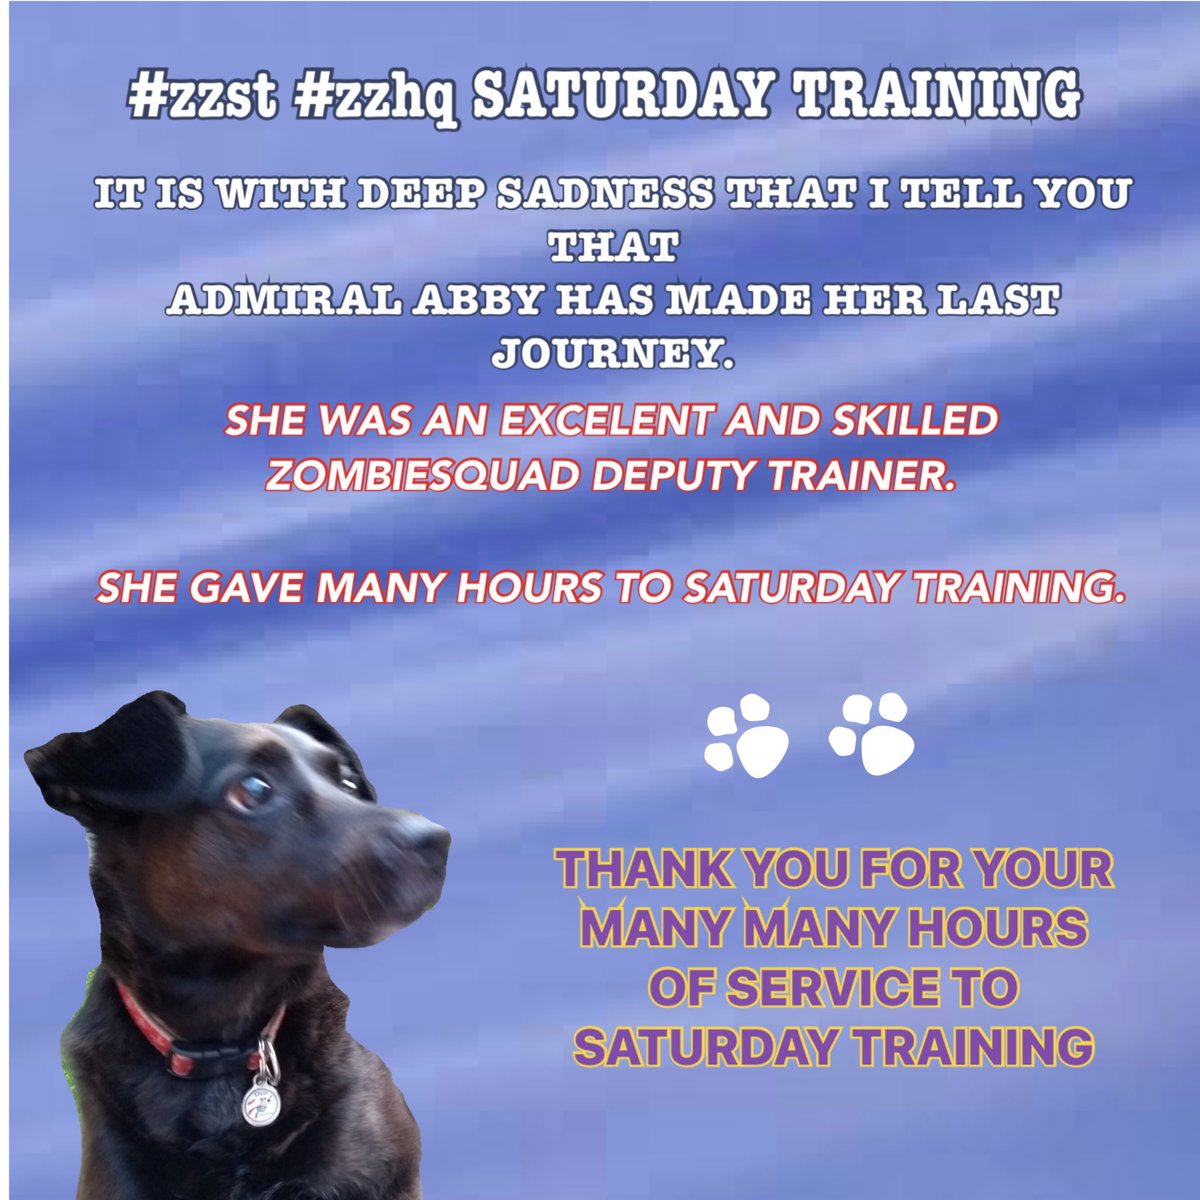 #zzst #zshq.... @sweetAbby20 @Helen09Porter FINLAY & I ARE BROKEN HEARTED TO HAVE TO MAKE THIS SAD SAD ANNOUNCEMENT TO YOU ALL. We will be cancelling Saturday Training (30.12.23) in memory of sweet Abbs, and as a tribute to her years of service.